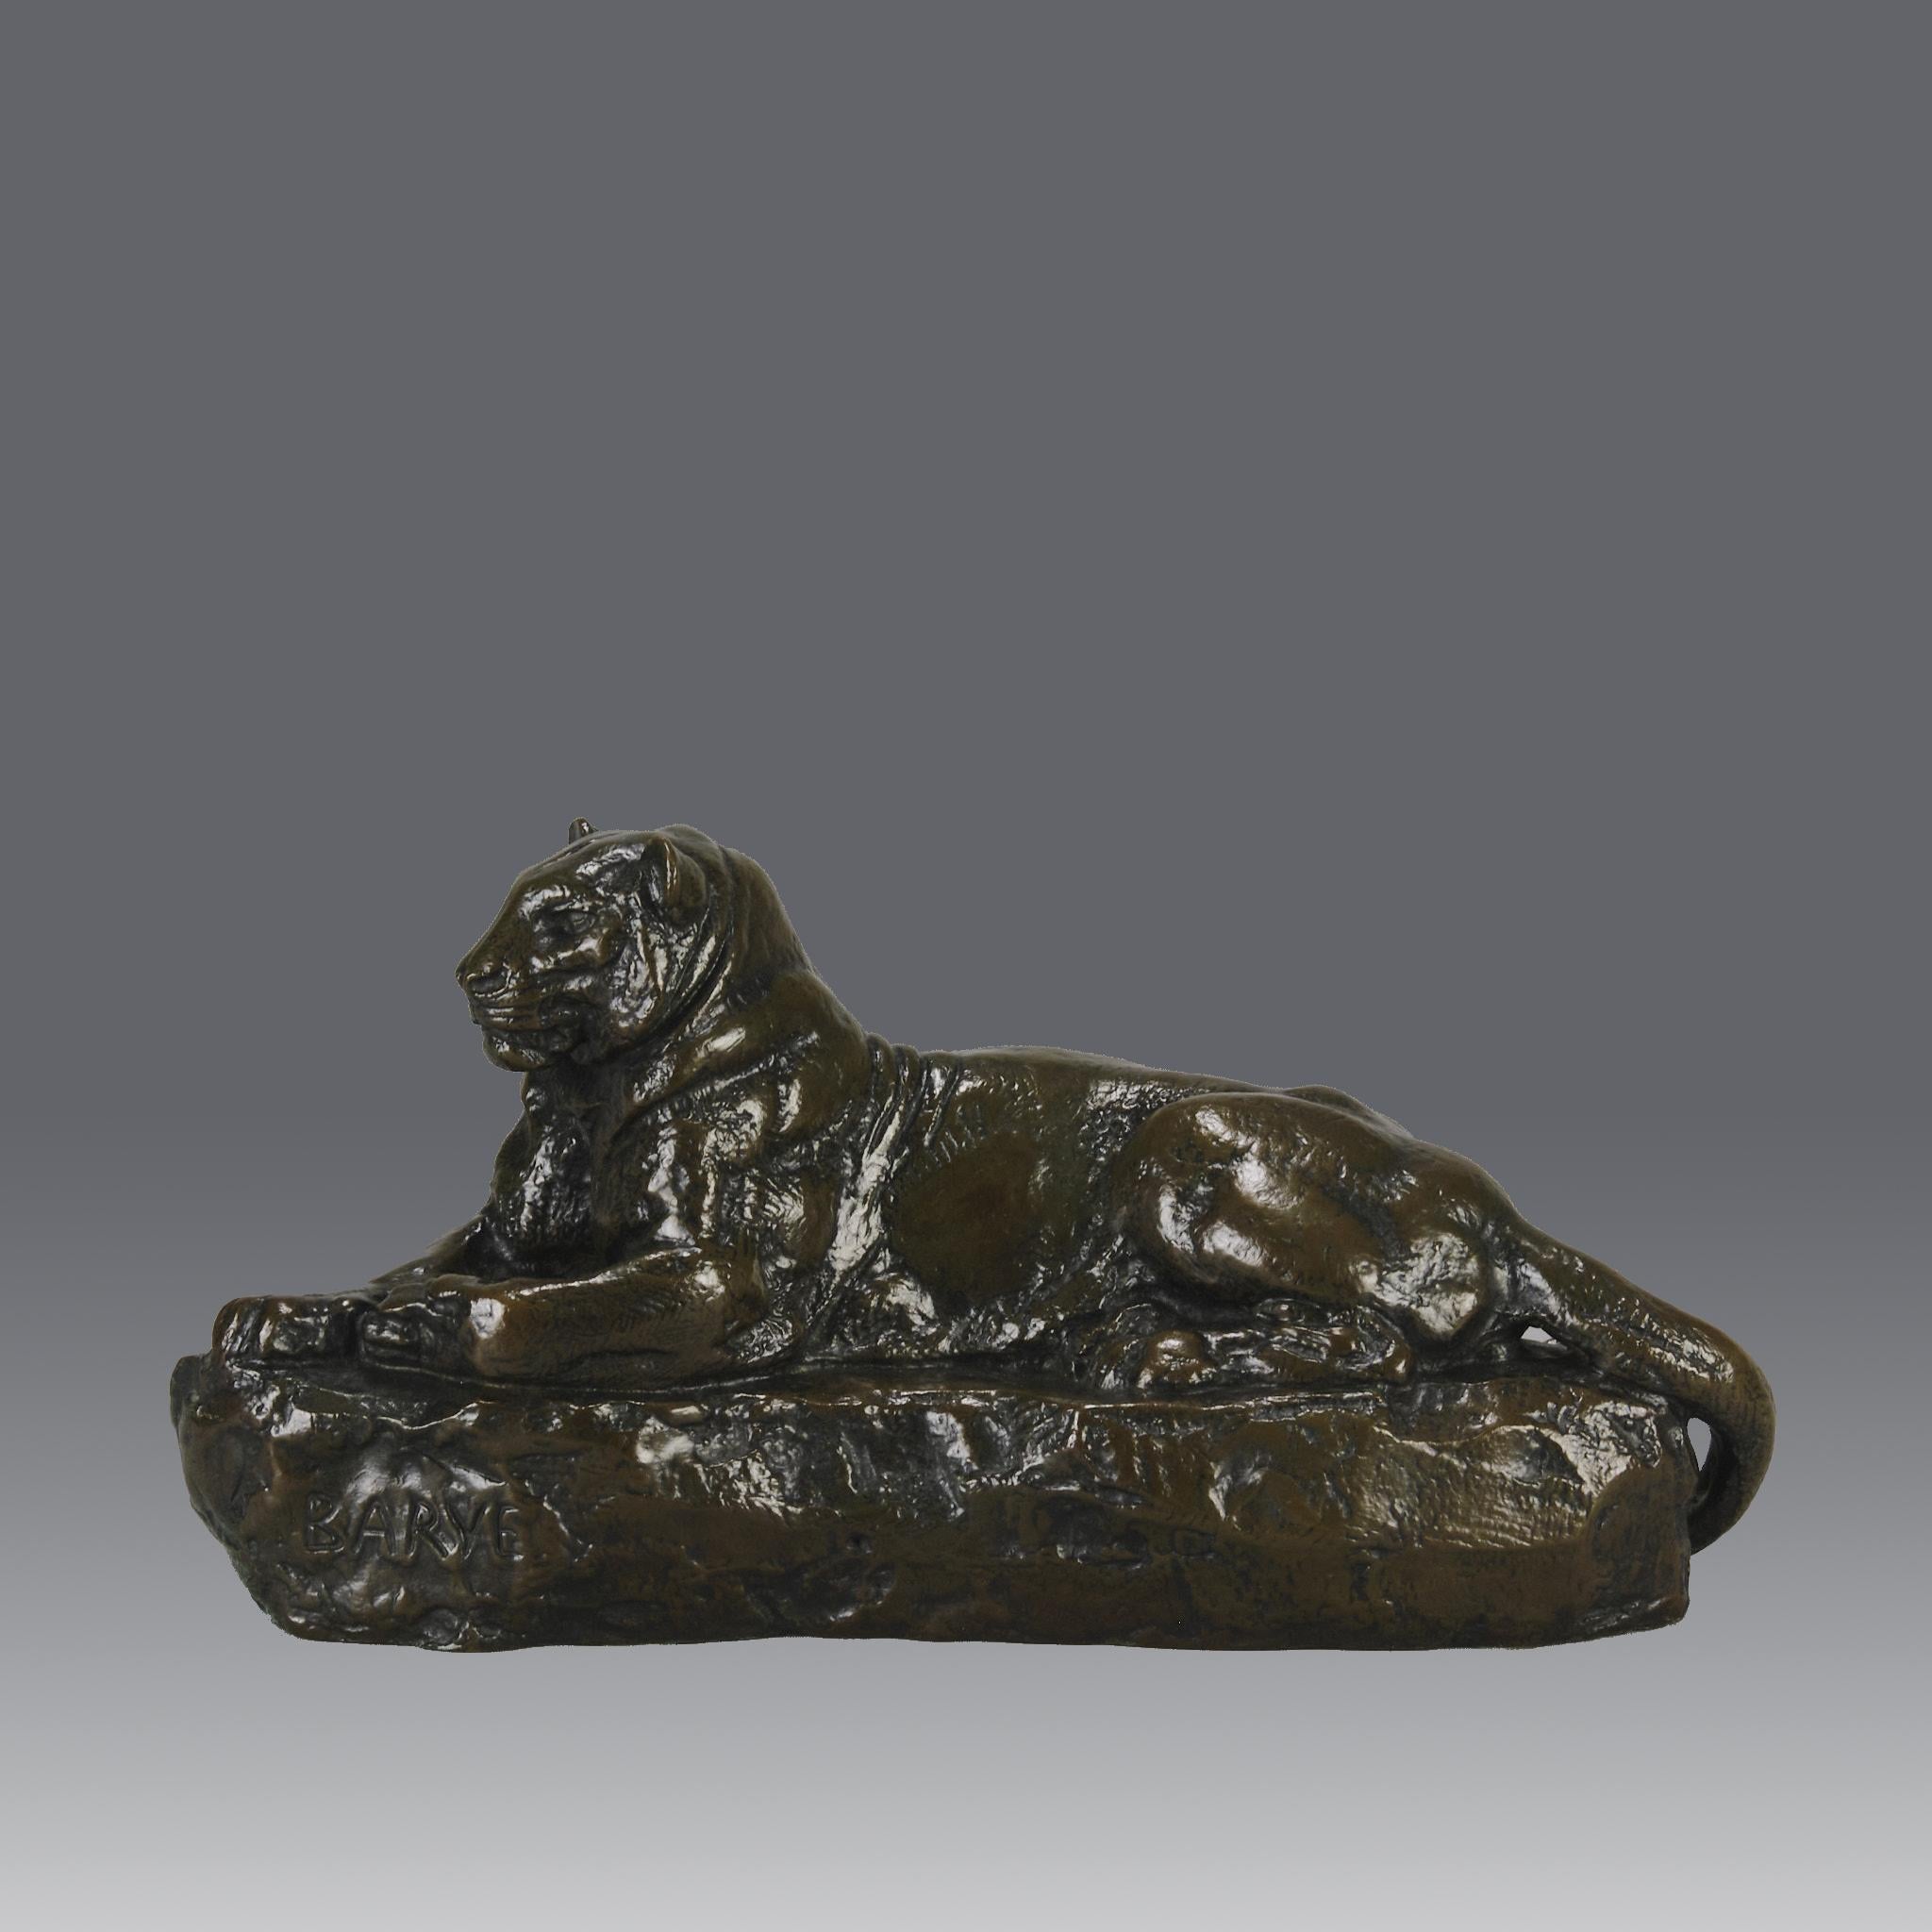 An excellent mid 19th Century French animalier bronze study of reclining panther with wonderful autumnal (green, orange, black and brown) patination and very intricate hand chased surface detail. Signed Barye and cast in the artist's own